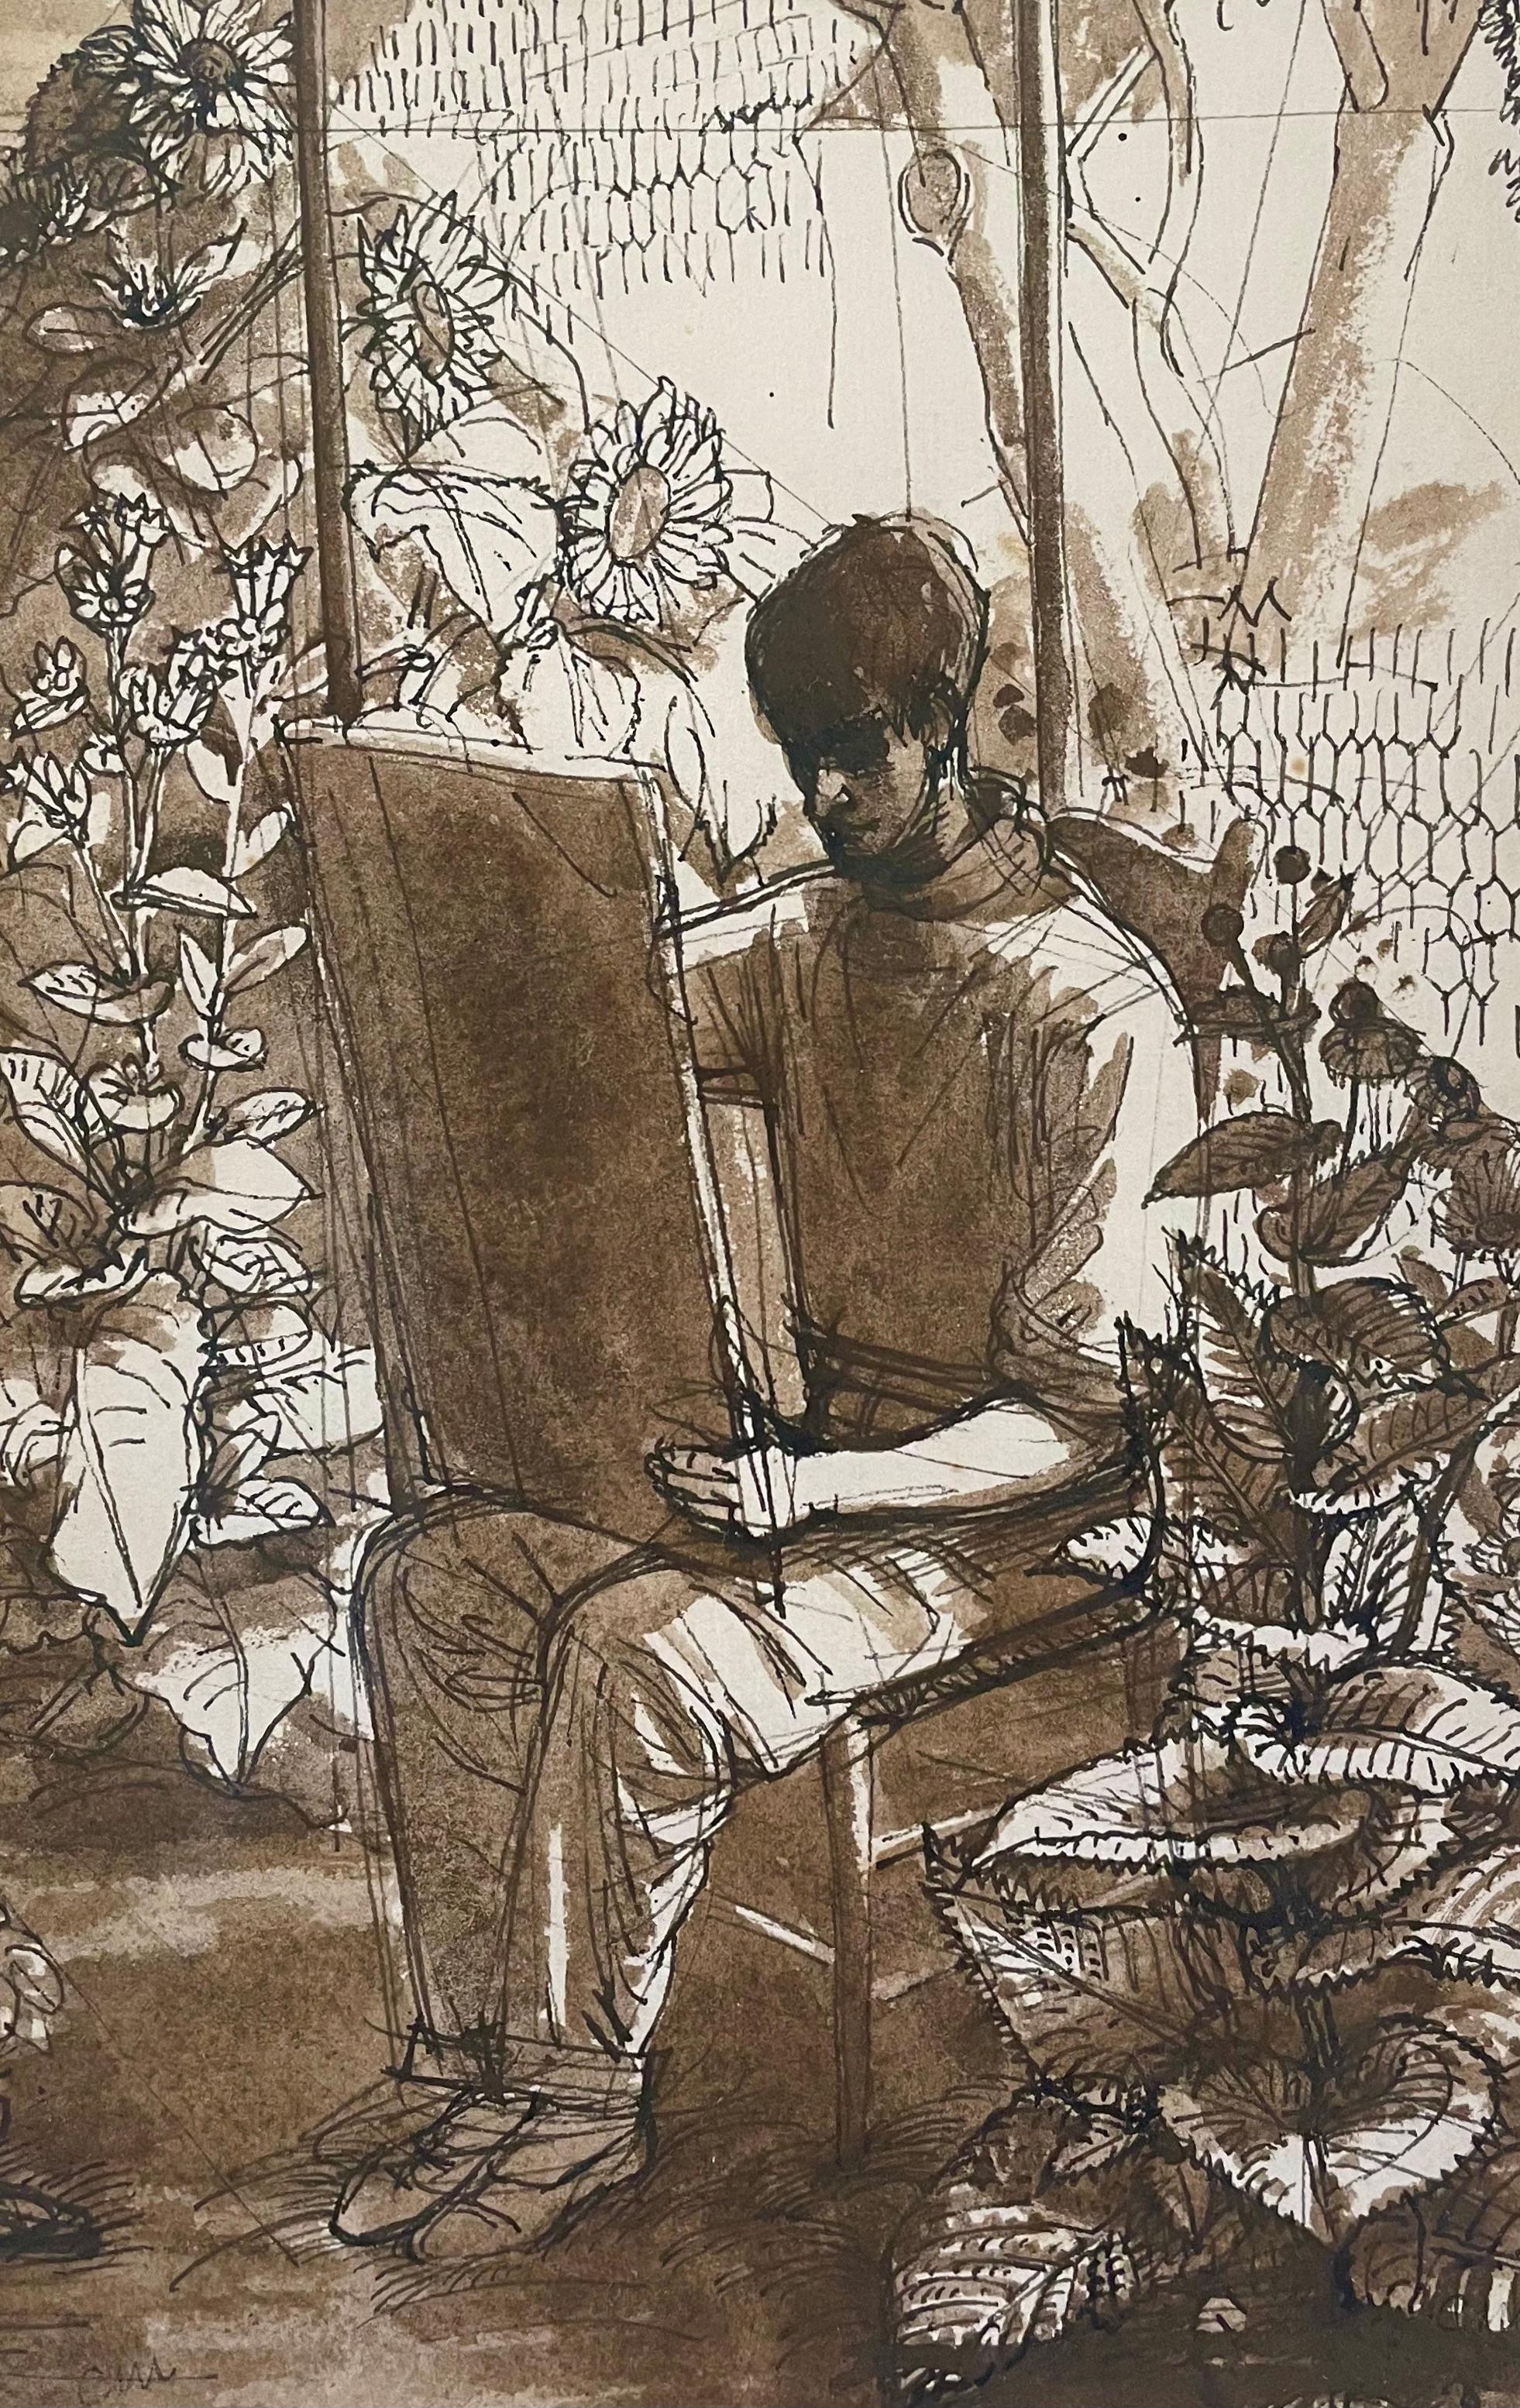 CHARLES MAHONEY
(1903-1968)

Self Portrait – A Study for Muses

Signed with initials l.l.
Pen and ink with sepia watercolour
Framed

27.5 by 18 cm., 10 ¾ by 7 in.
(frame size 46 by 35.5 cm., 18 by 14 in.)

The present work is a study for the